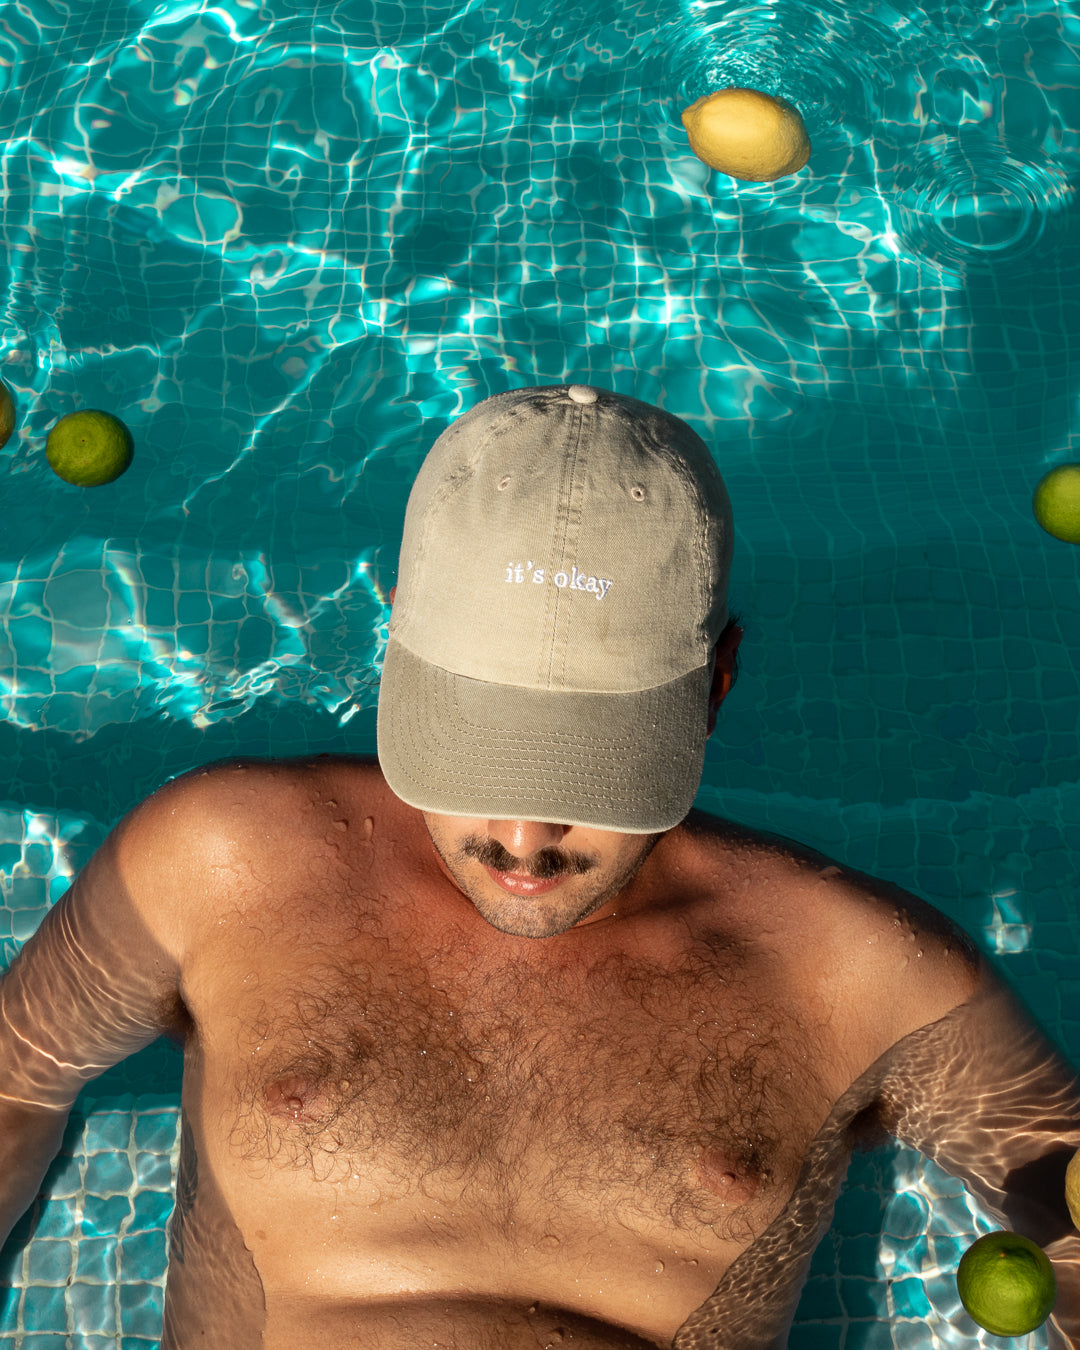 it's okay stone cap, beige cap made with 100% cotton, embroidered. it's okay to be exactly who you are. From Portugal with love. Boné de pala bege de algodão bordado em Portugal. Image: boy inside a swimming pool wearing the it's okay stone cap, with lemons floating on the water. 